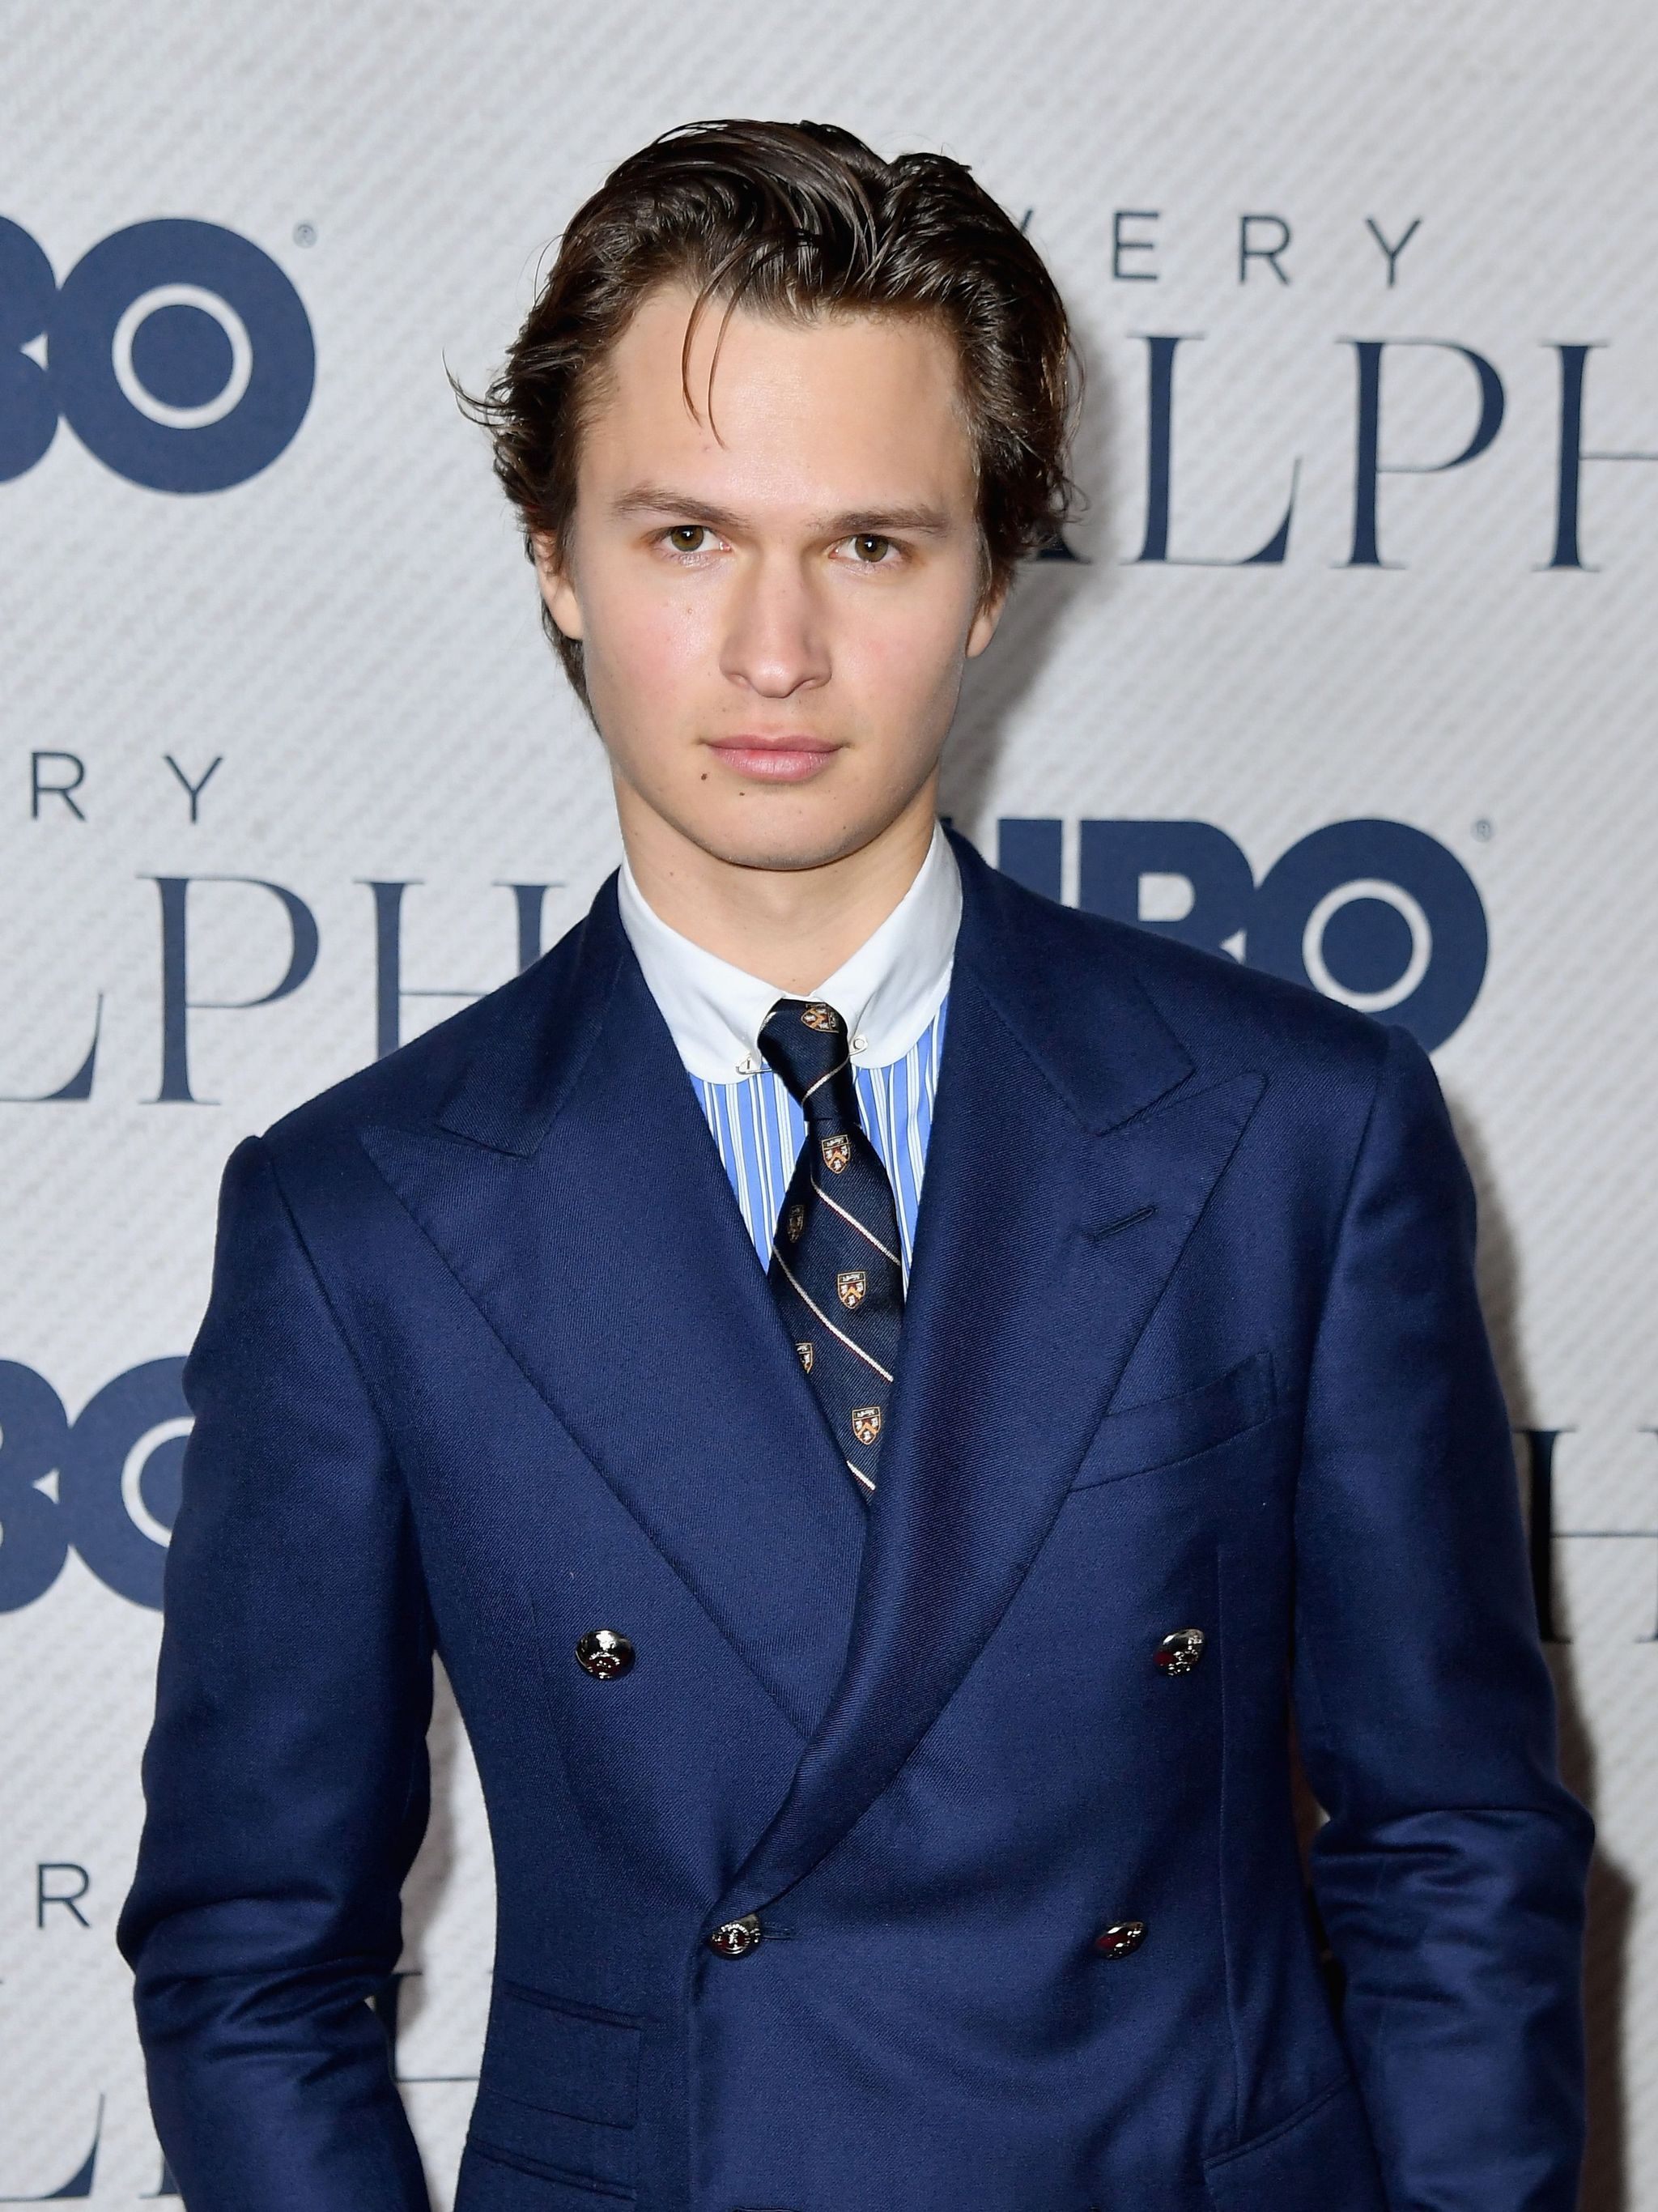 Very Ralph Makes Its Stylish Debut on HBO